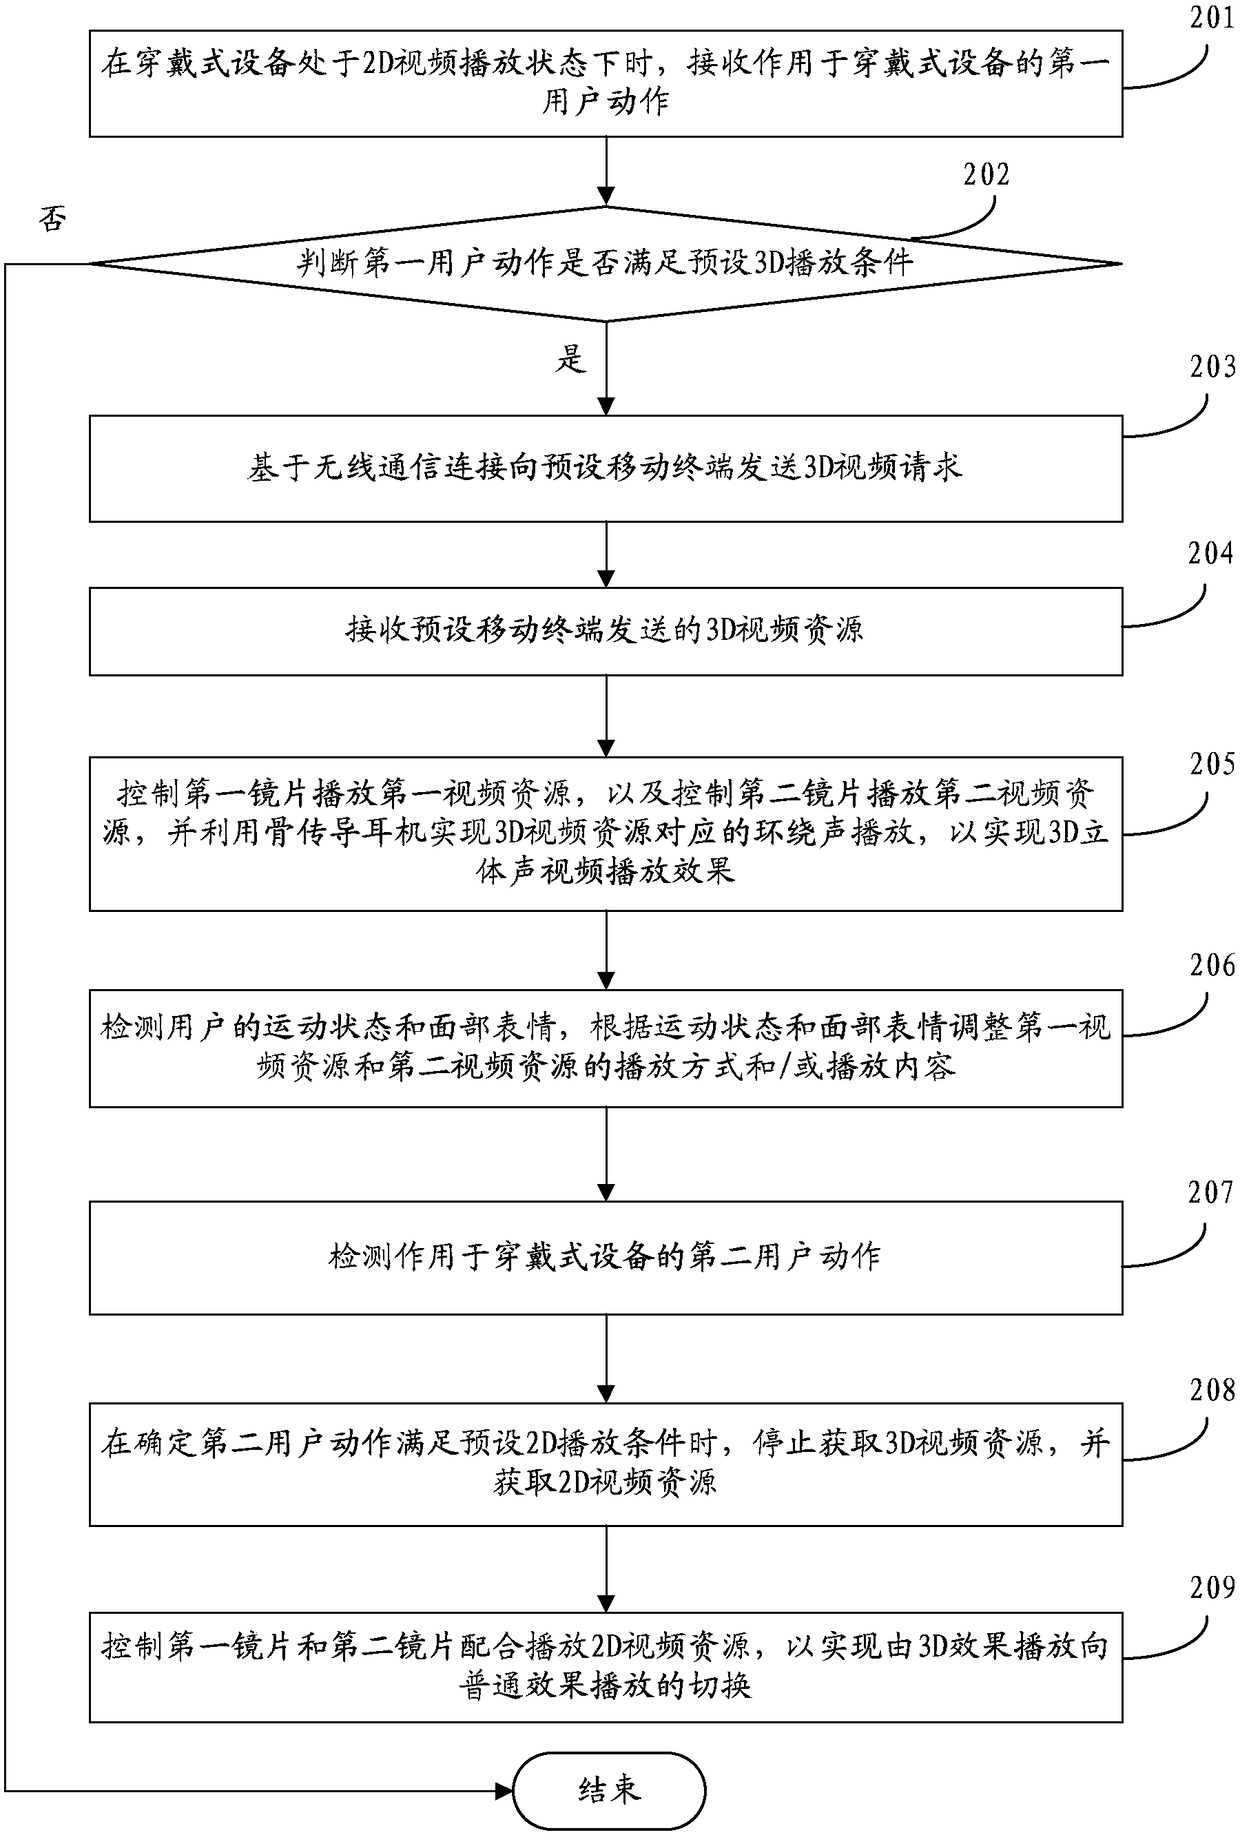 Video playing method, device, storage medium and wearable device